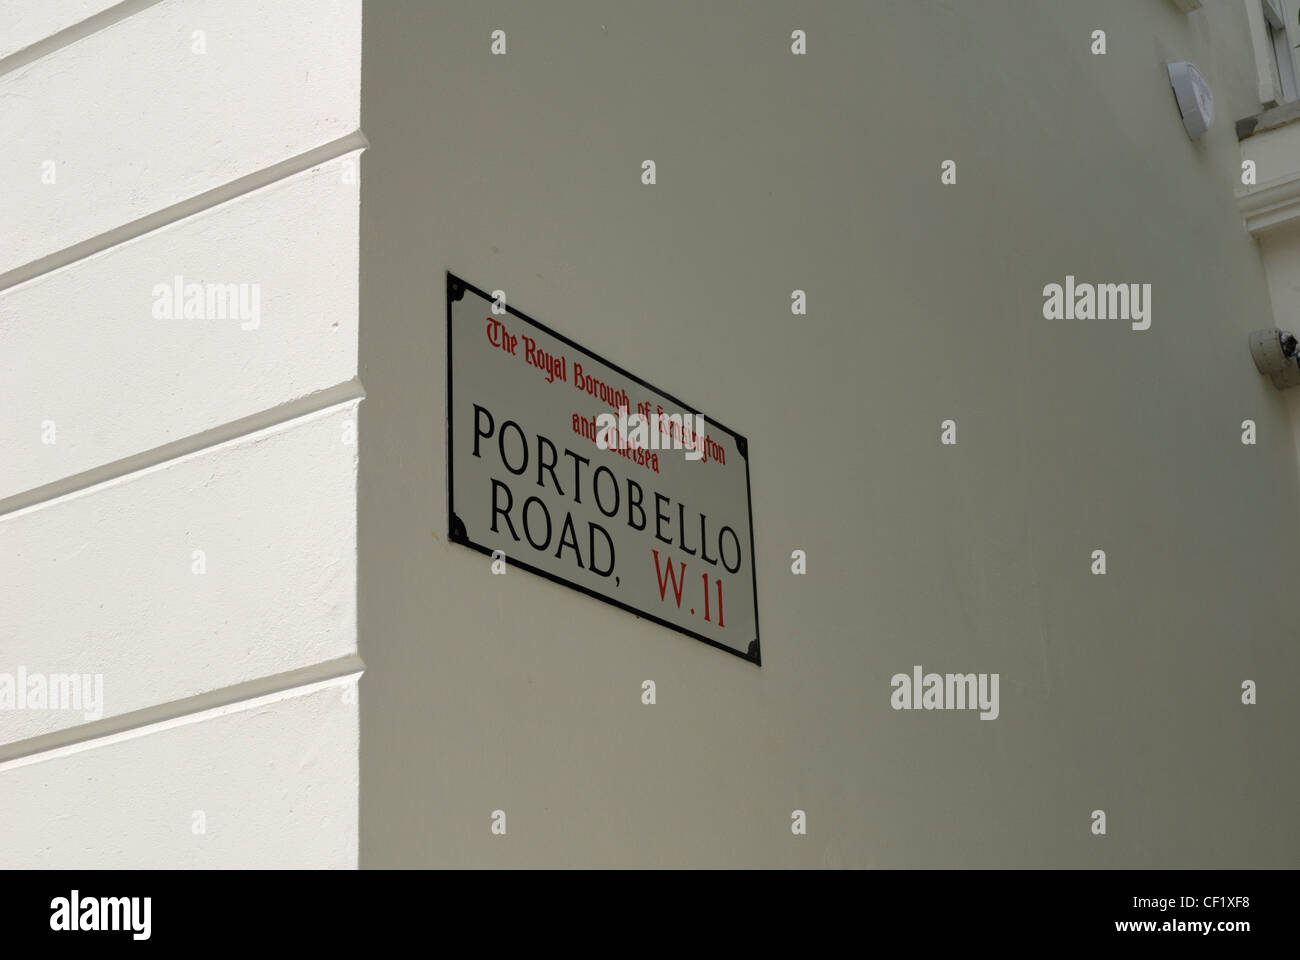 Street sign on the side of a house in Portobello Road, Notting Hill. Portobello Road is the location for the famous antiques mar Stock Photo